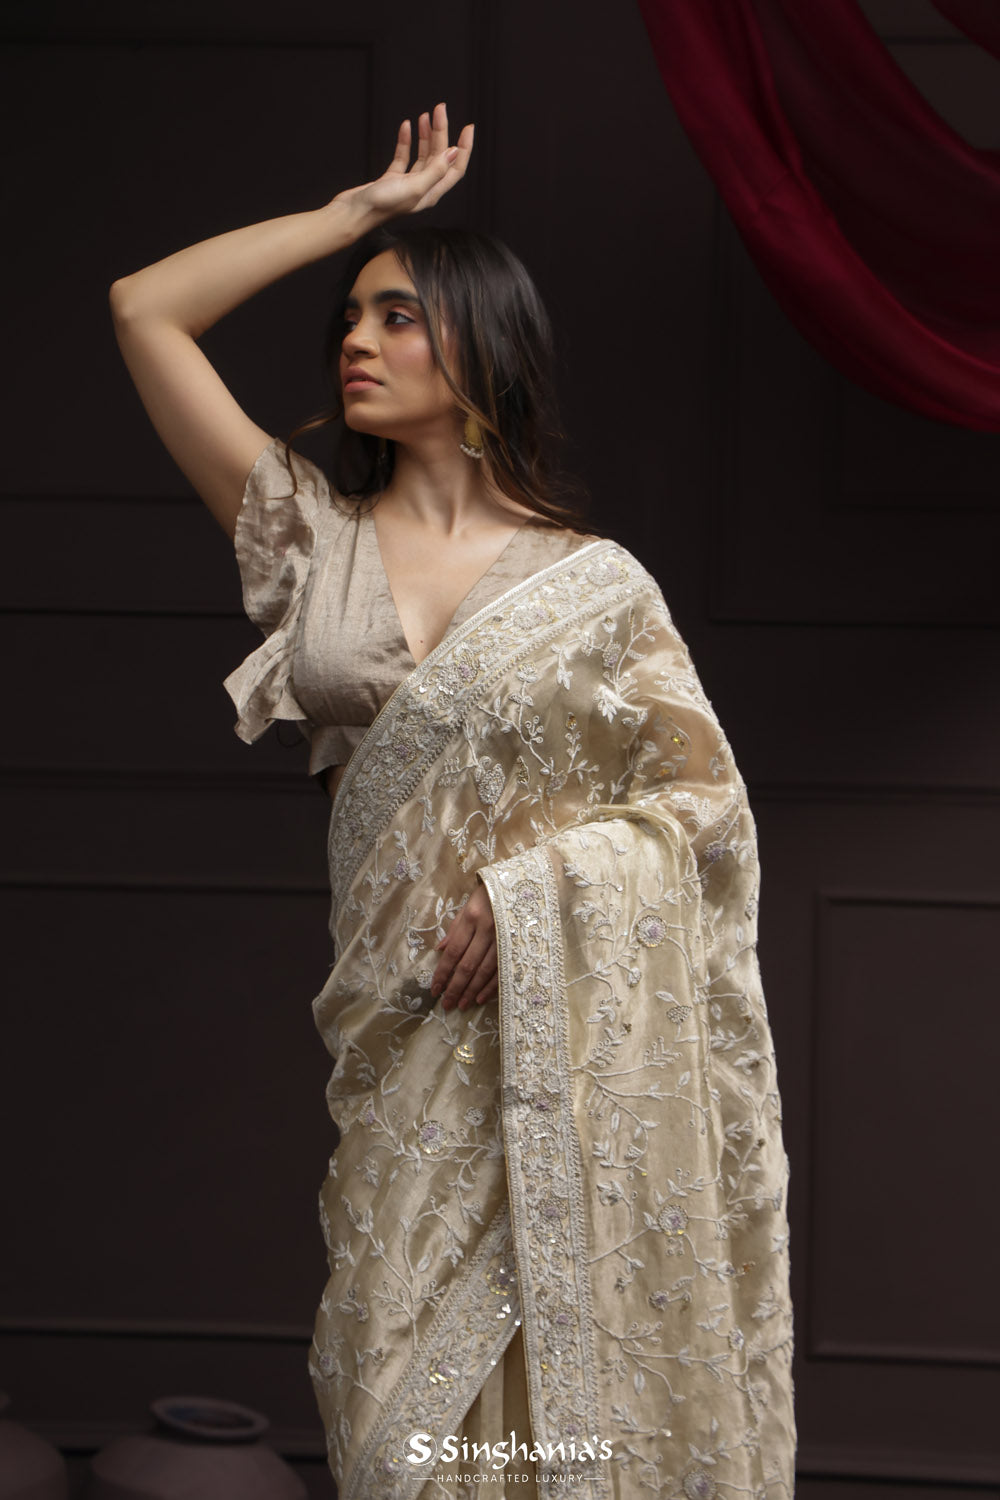 Royal Beige Tissue Designer Saree With Floral Embroidery